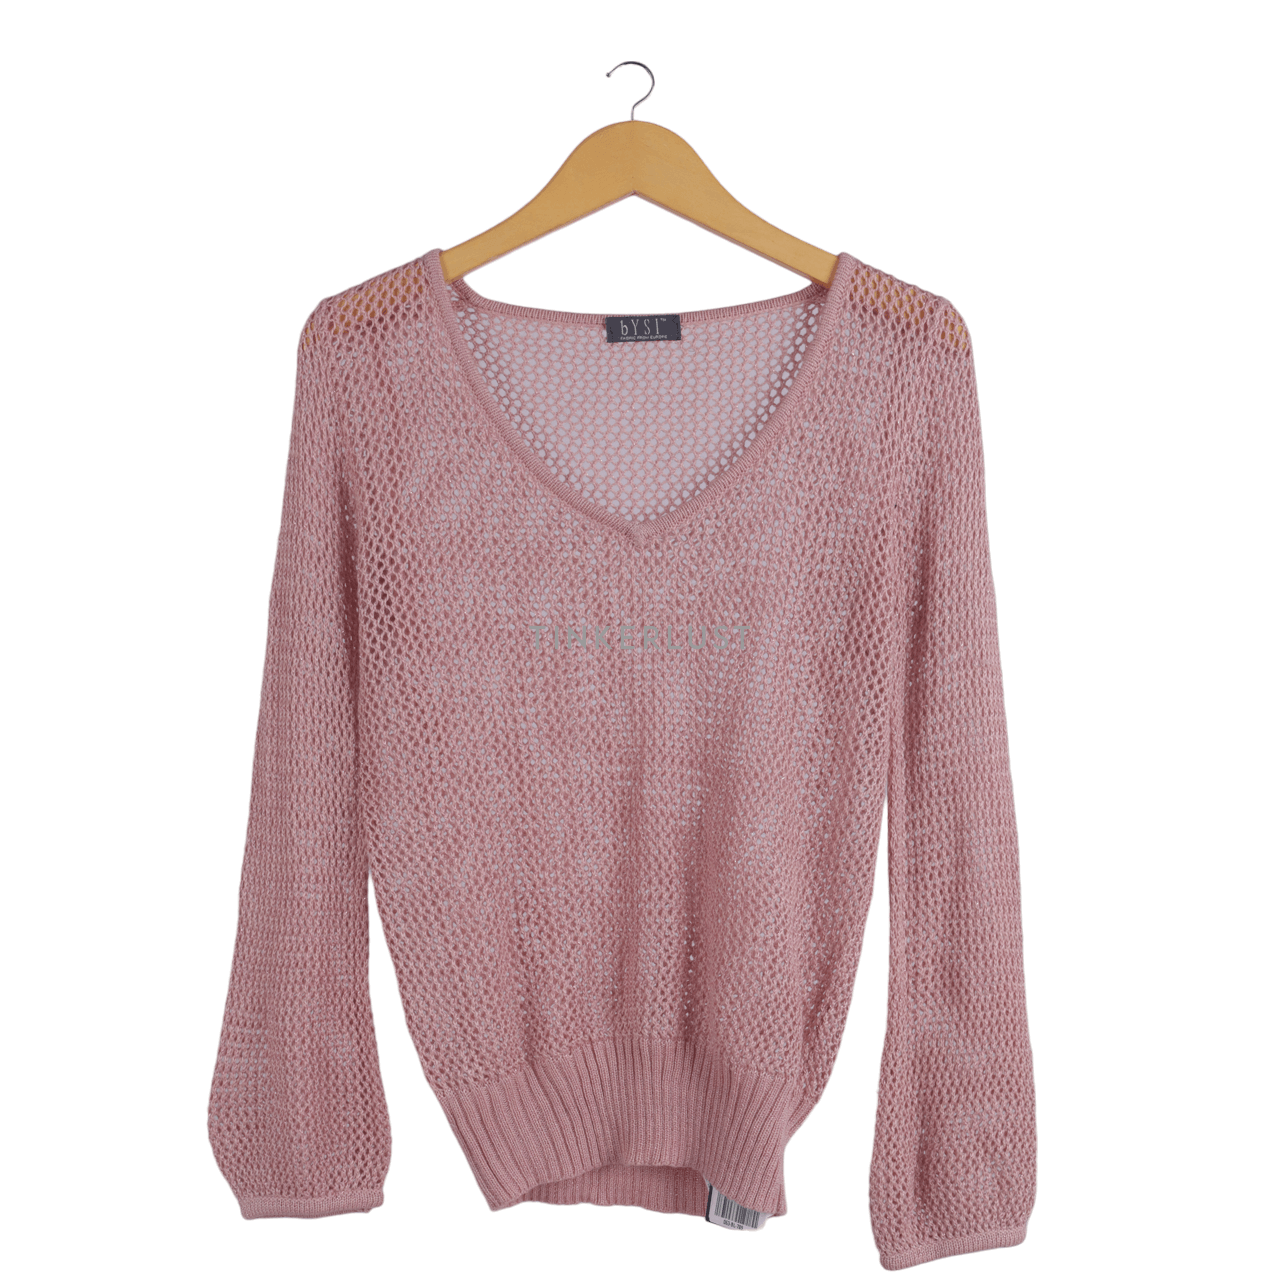 bYSI Dusty Pink Blouse